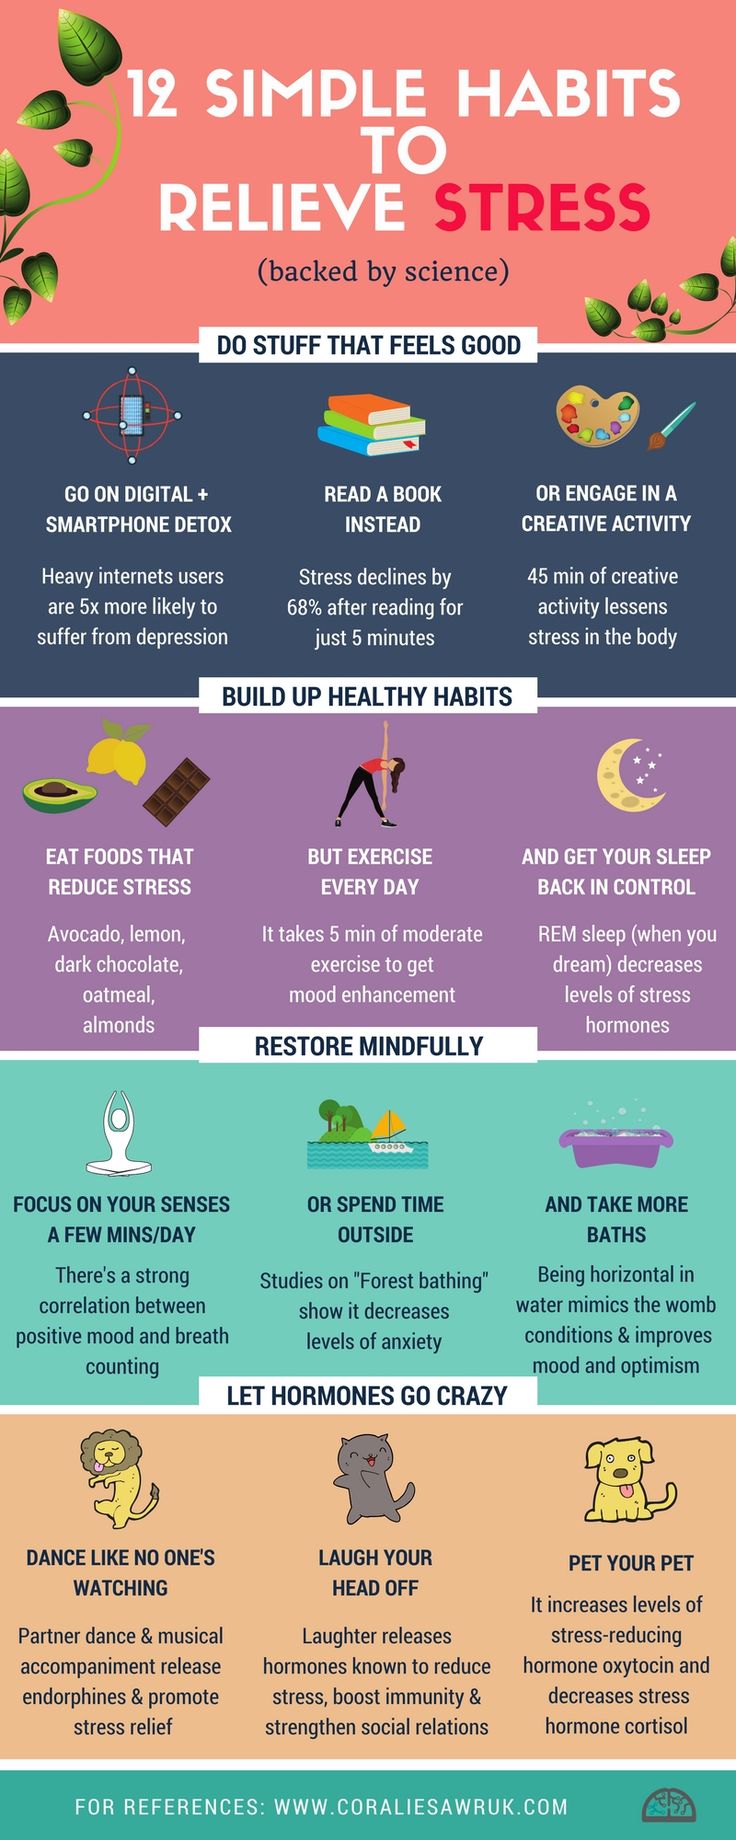 Psychology-Infographic-12-simple-habits-to-relieve-stress-infographic Psychology Infographic : 12 simple habits to relieve stress [infographic]